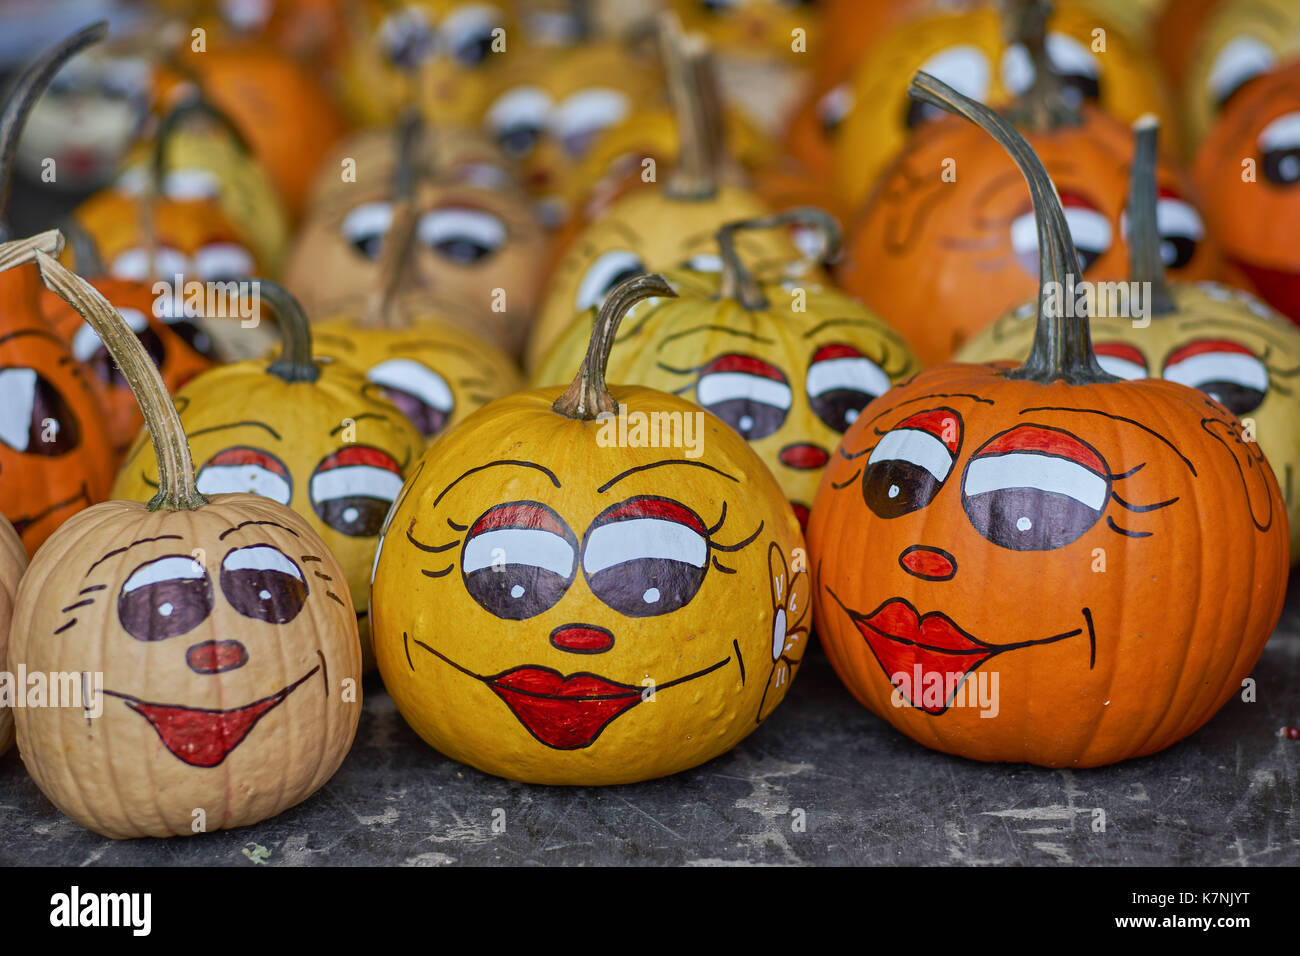 Smiling pumpkins Pumpkins with painted eyes lips nose and eyebrows many multicolor pumpkins many multi-shaped pumpkins many colorful pumpkins Stock Photo